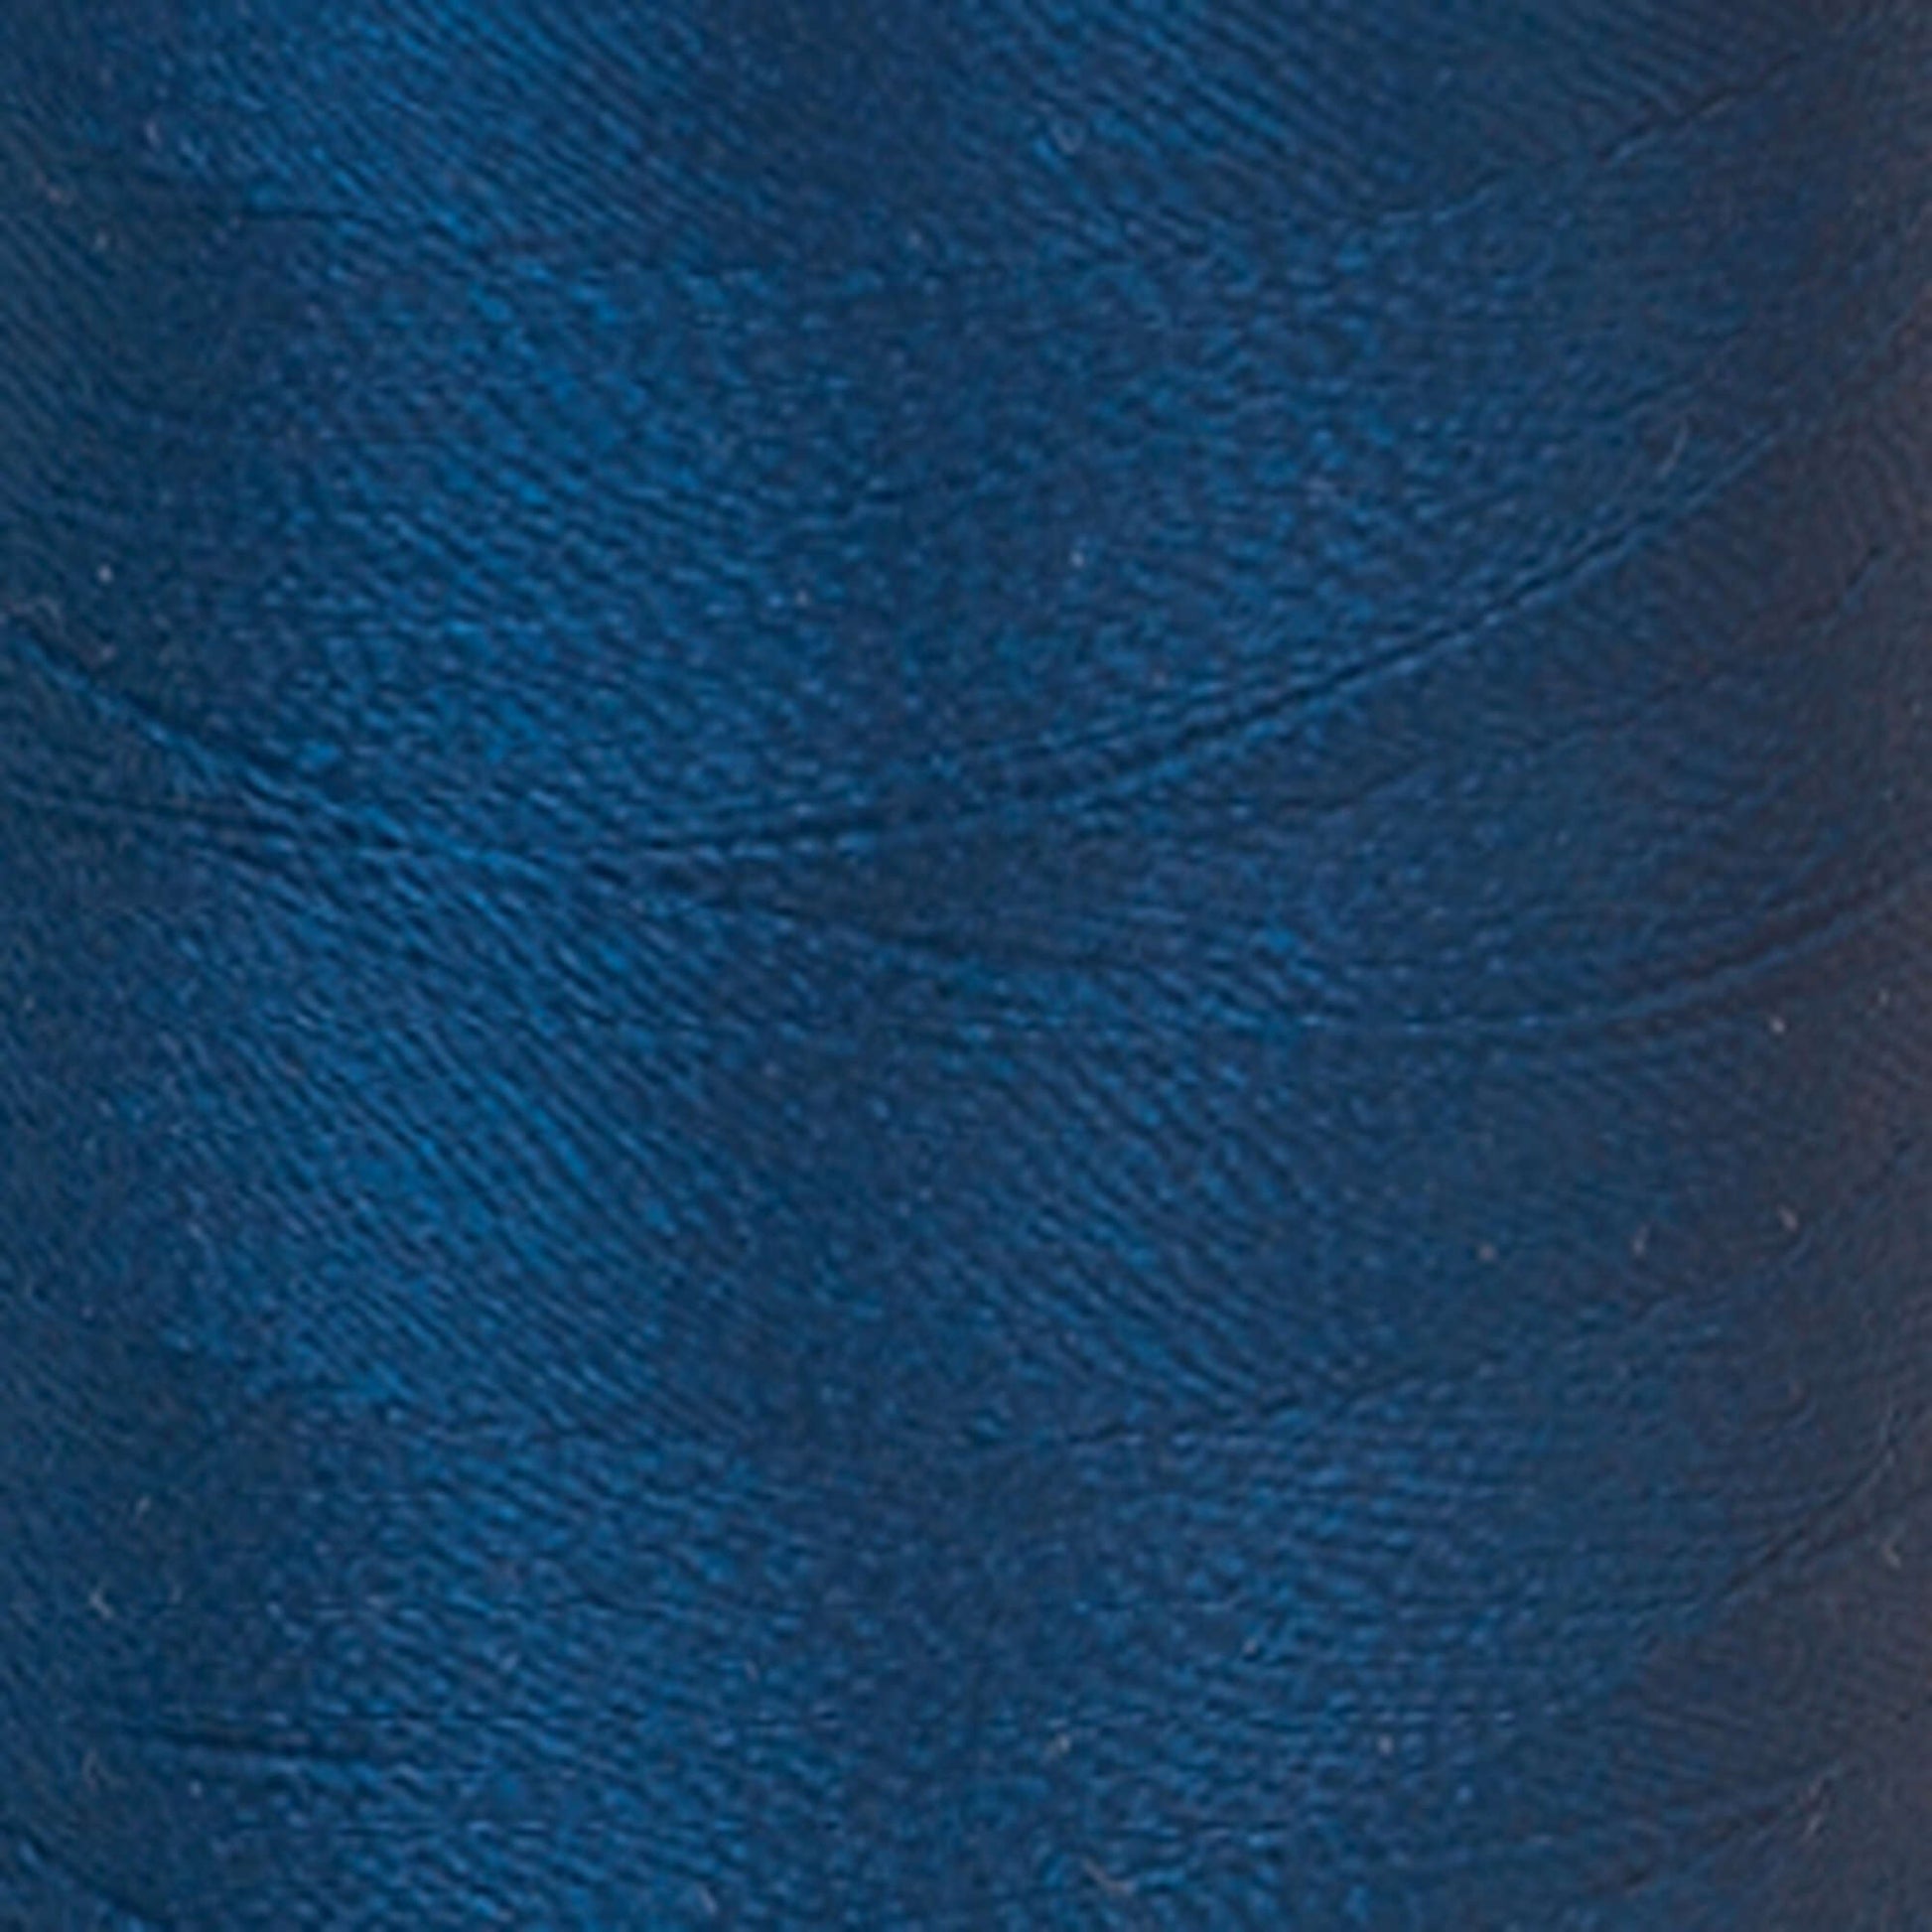 Coats & Clark Machine Embroidery Thread (1100 Yards) Pacific Blue